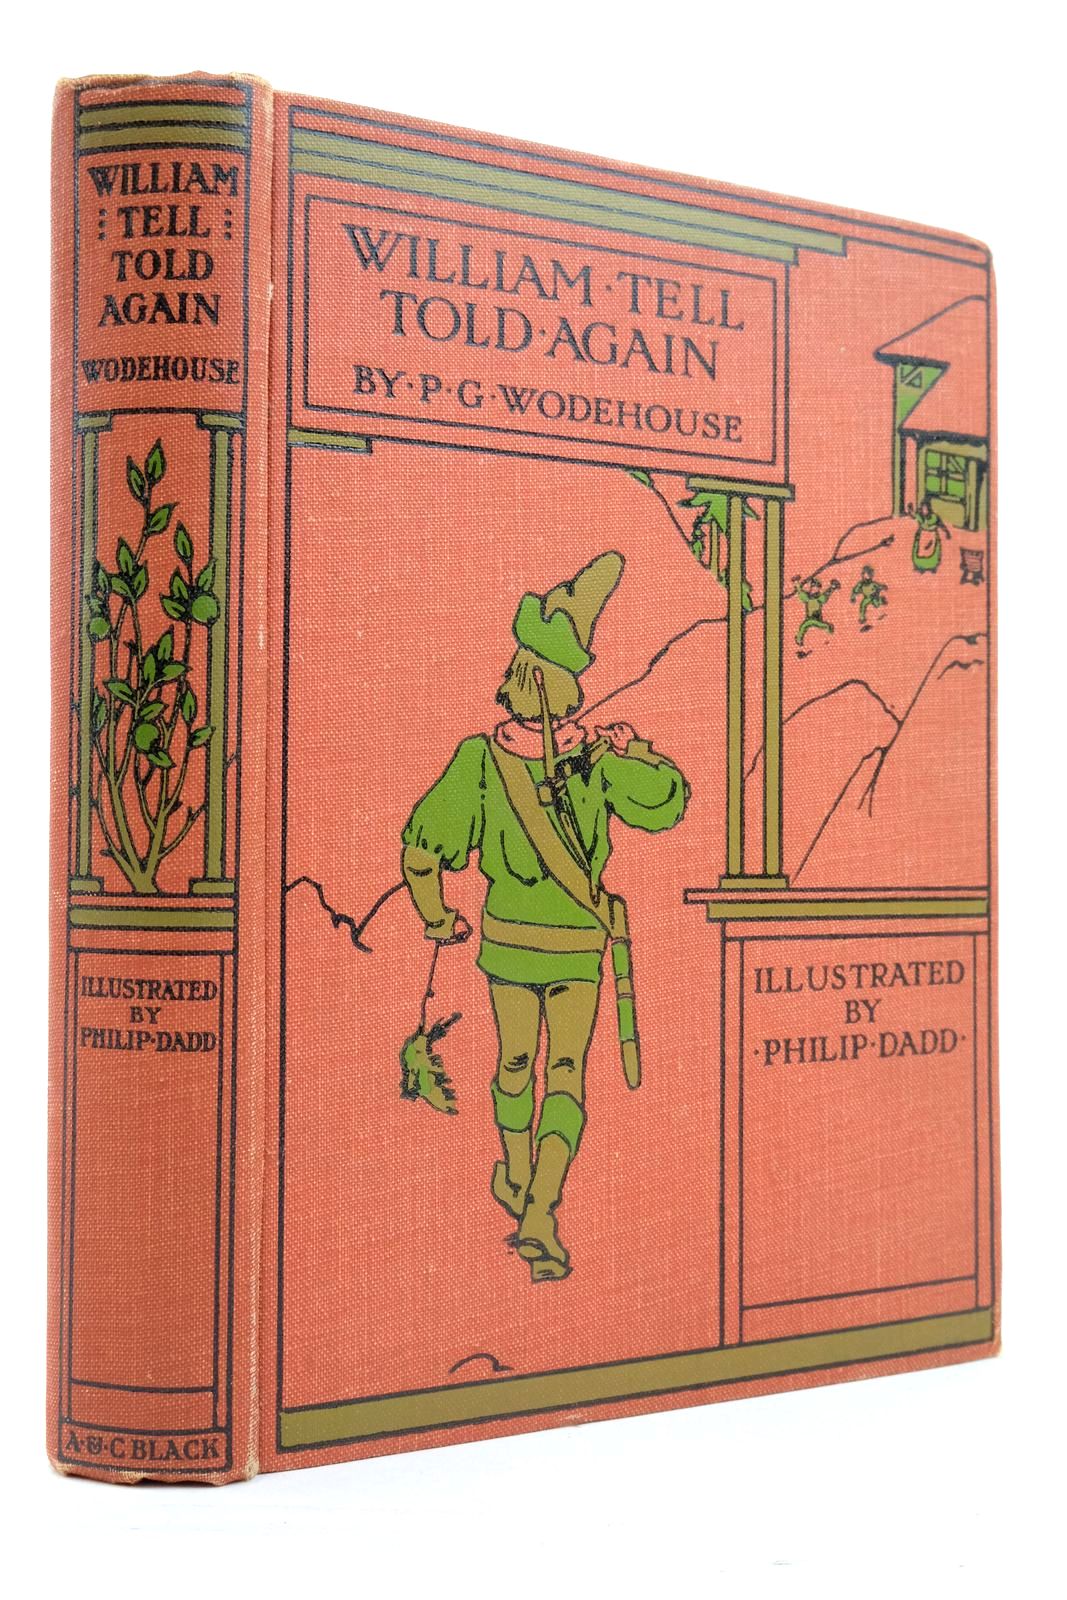 Photo of WILLIAM TELL TOLD AGAIN written by Wodehouse, P.G. Houghton, John W. illustrated by Dadd, Philip published by A. &amp; C. Black Ltd. (STOCK CODE: 2138092)  for sale by Stella & Rose's Books